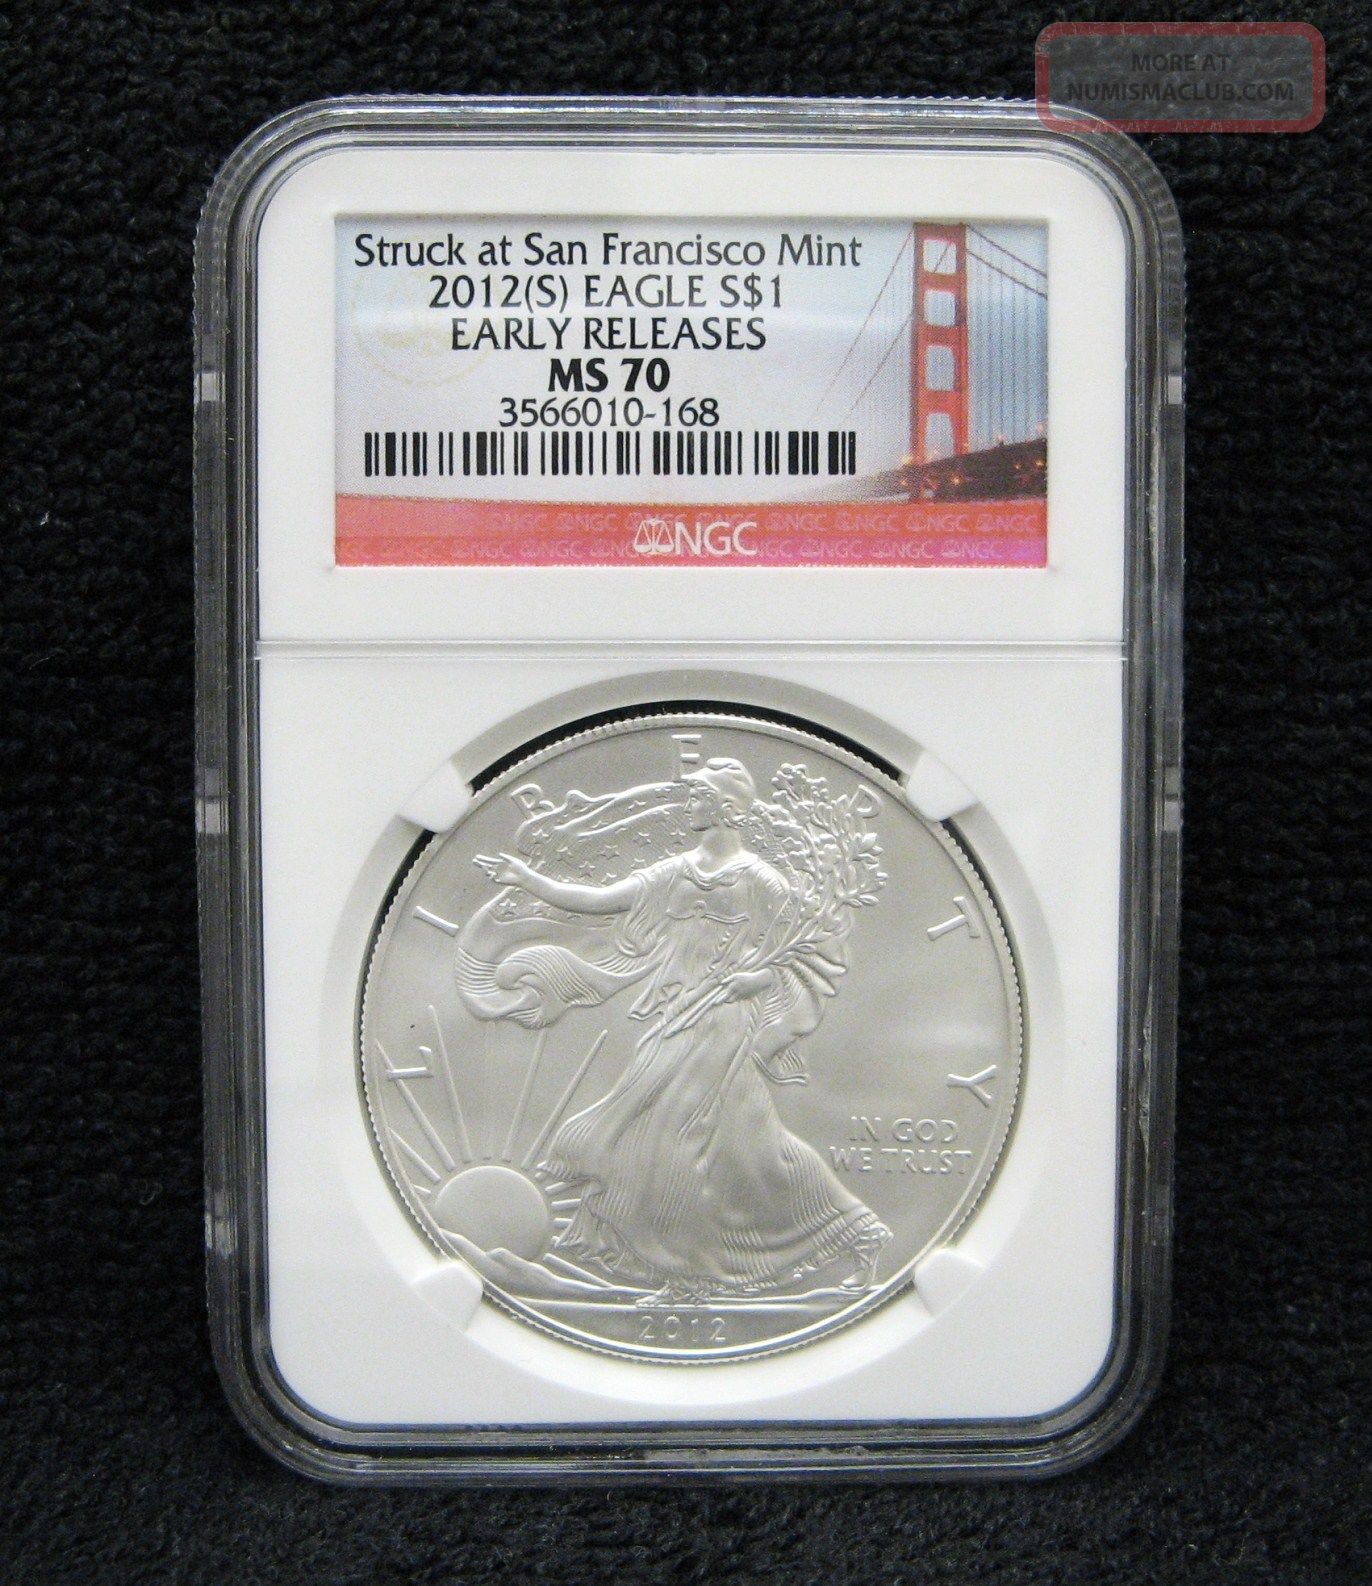 2012 (s) American Silver Eagle Ngc Ms70, Golden Gate Bridge Label Early